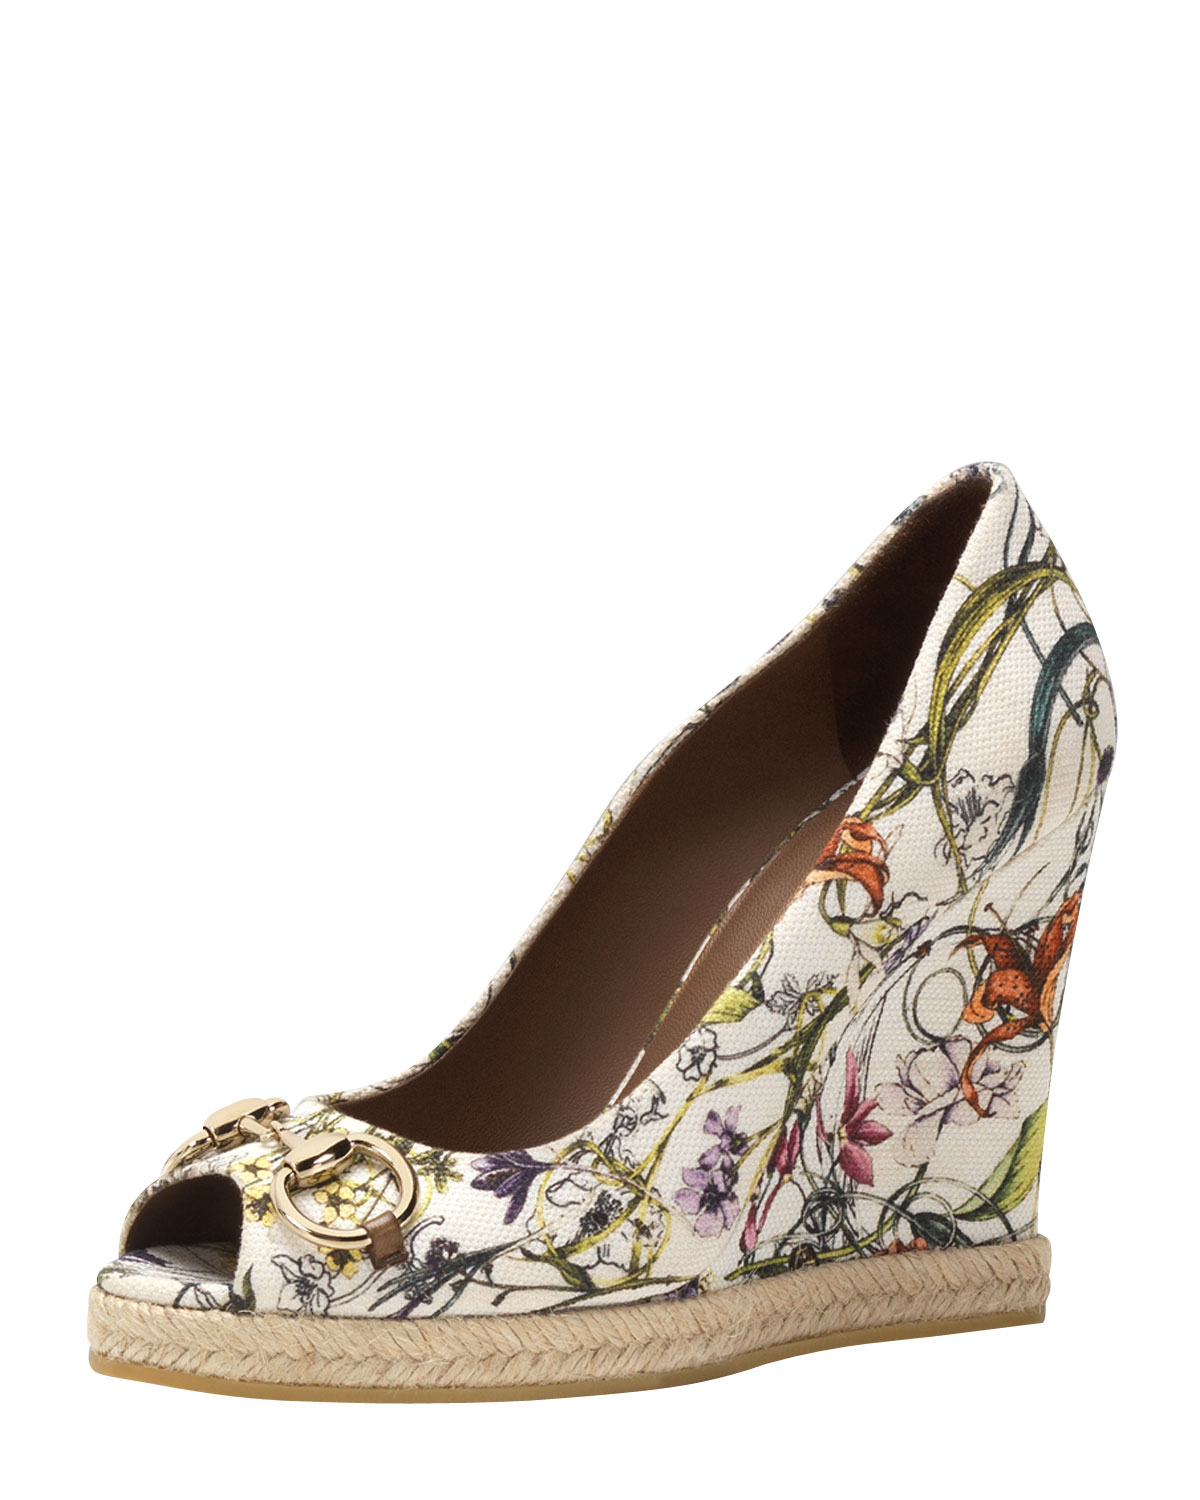 Gucci Floral Canvas Wedge Pump in Floral (multi) | Lyst